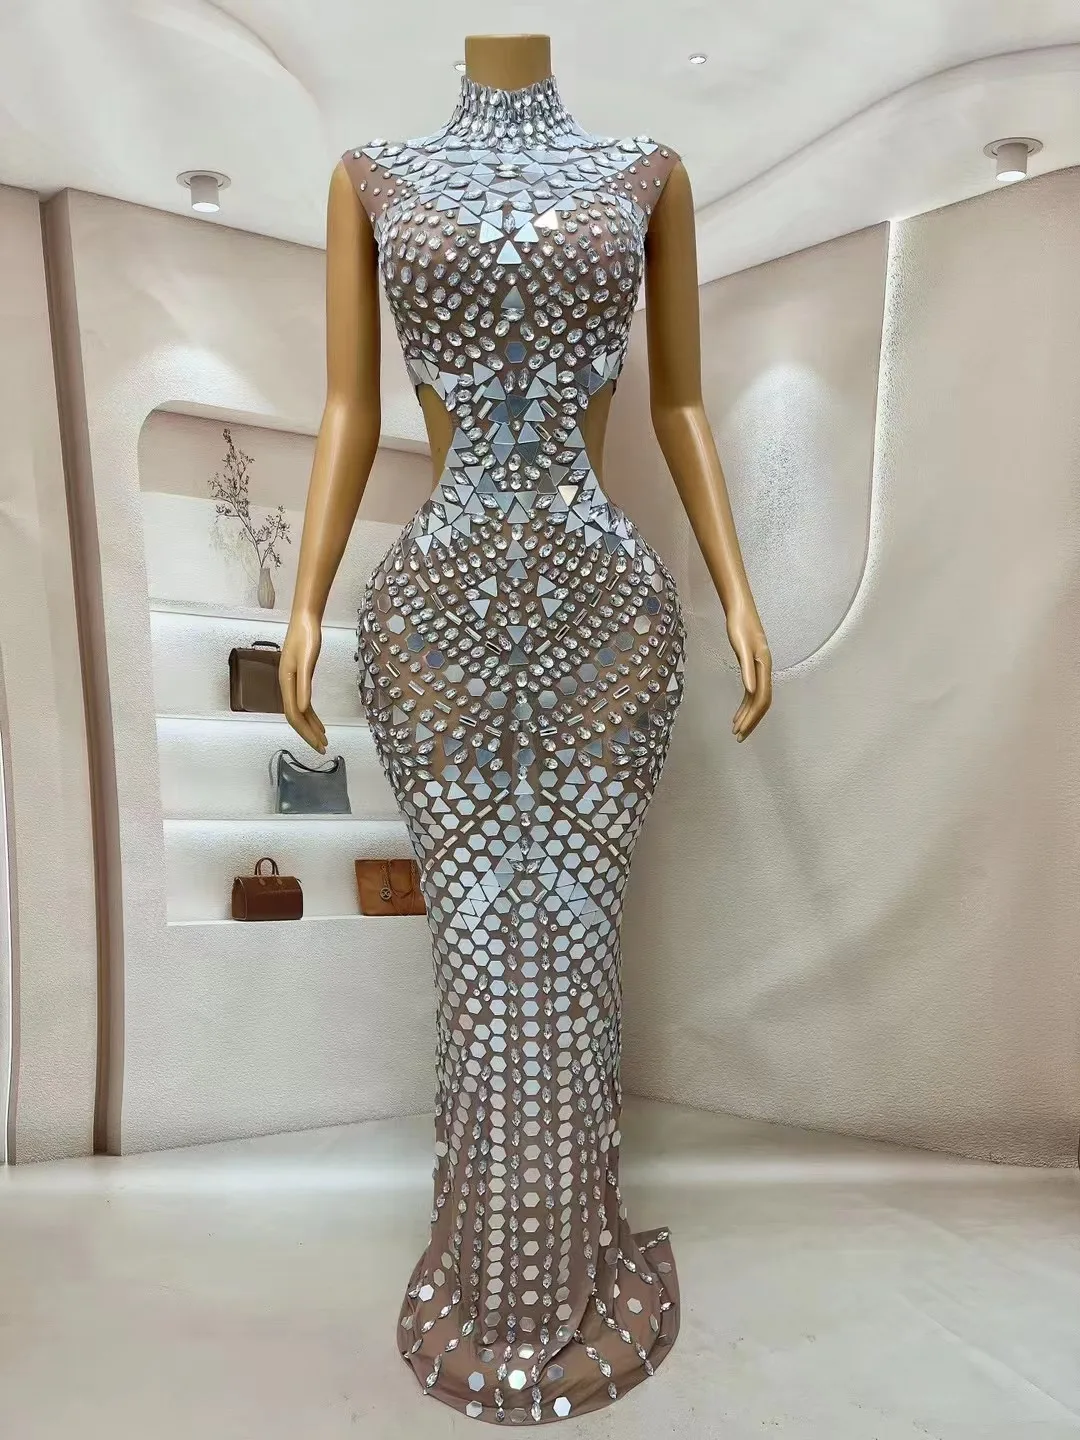 Sexy Stage Silver Mirrors Rhinestones Hollow Waist Dress Transparent Outfit Dance Stage Show Nightclub Costume Photoshoot Dress